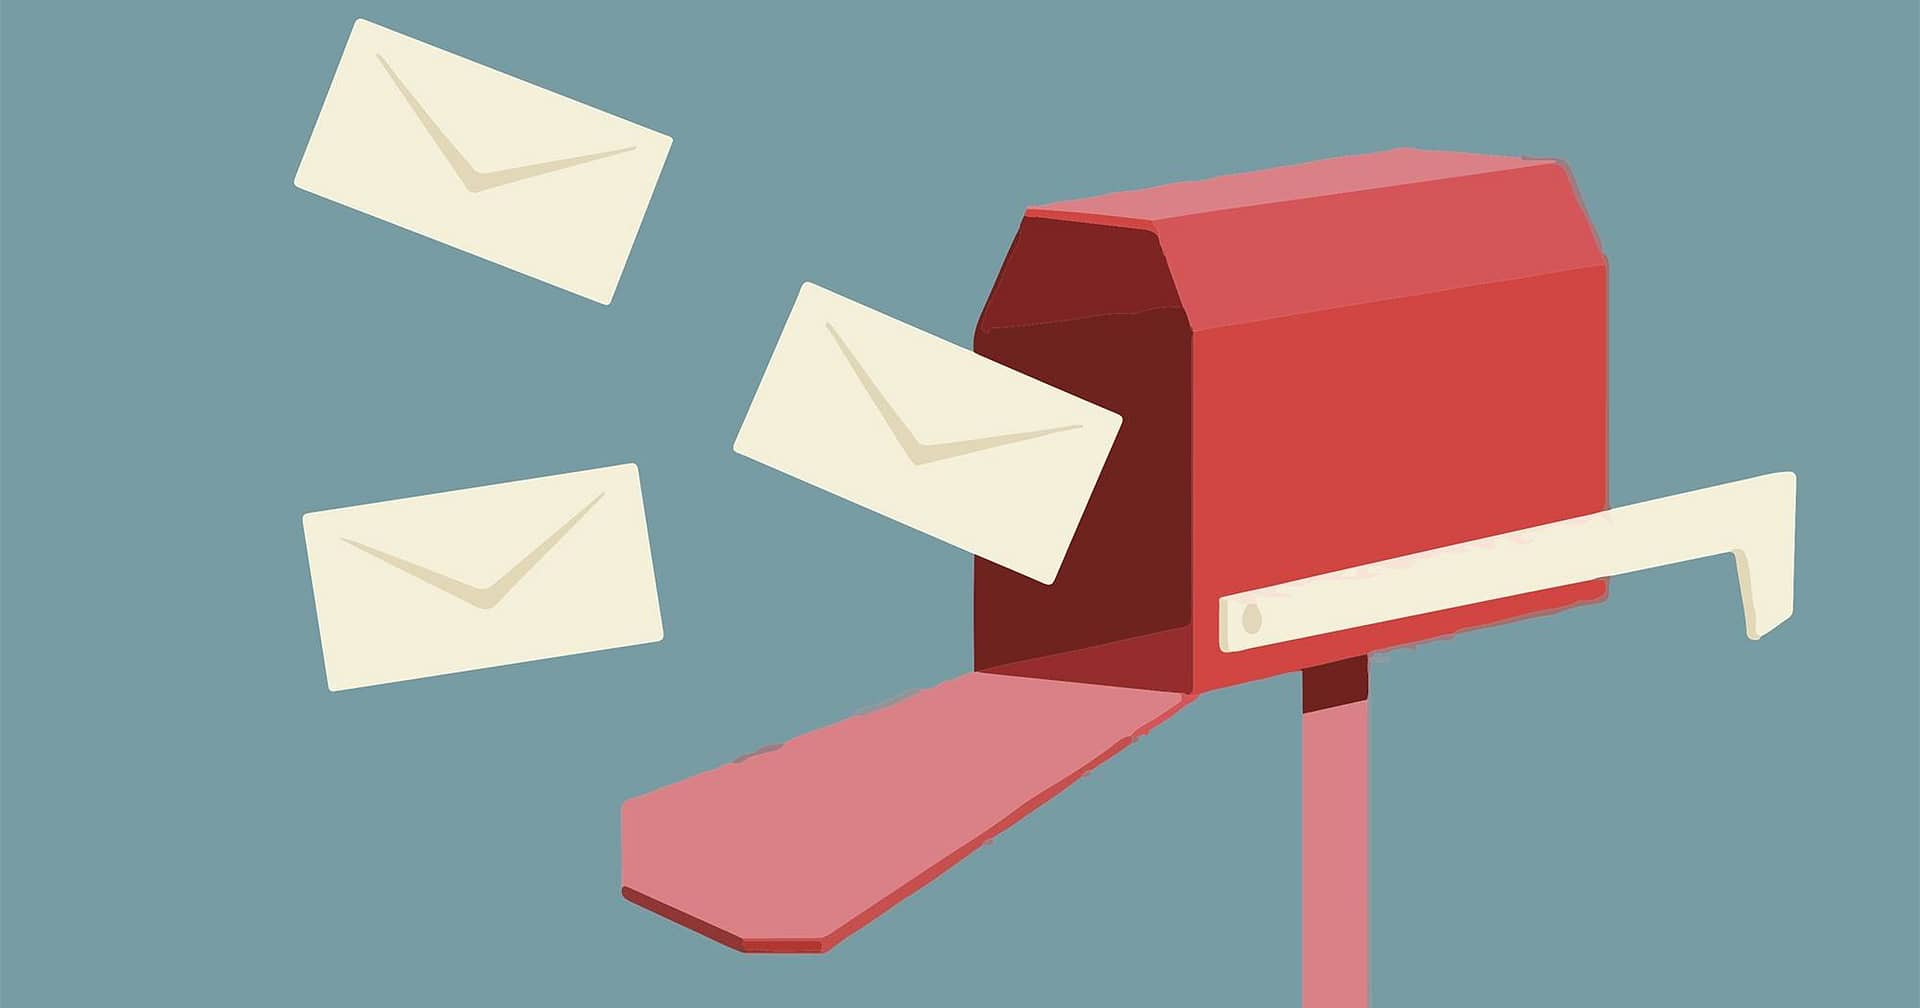 Integrating Direct Mail into your Digital Marketing Strategy